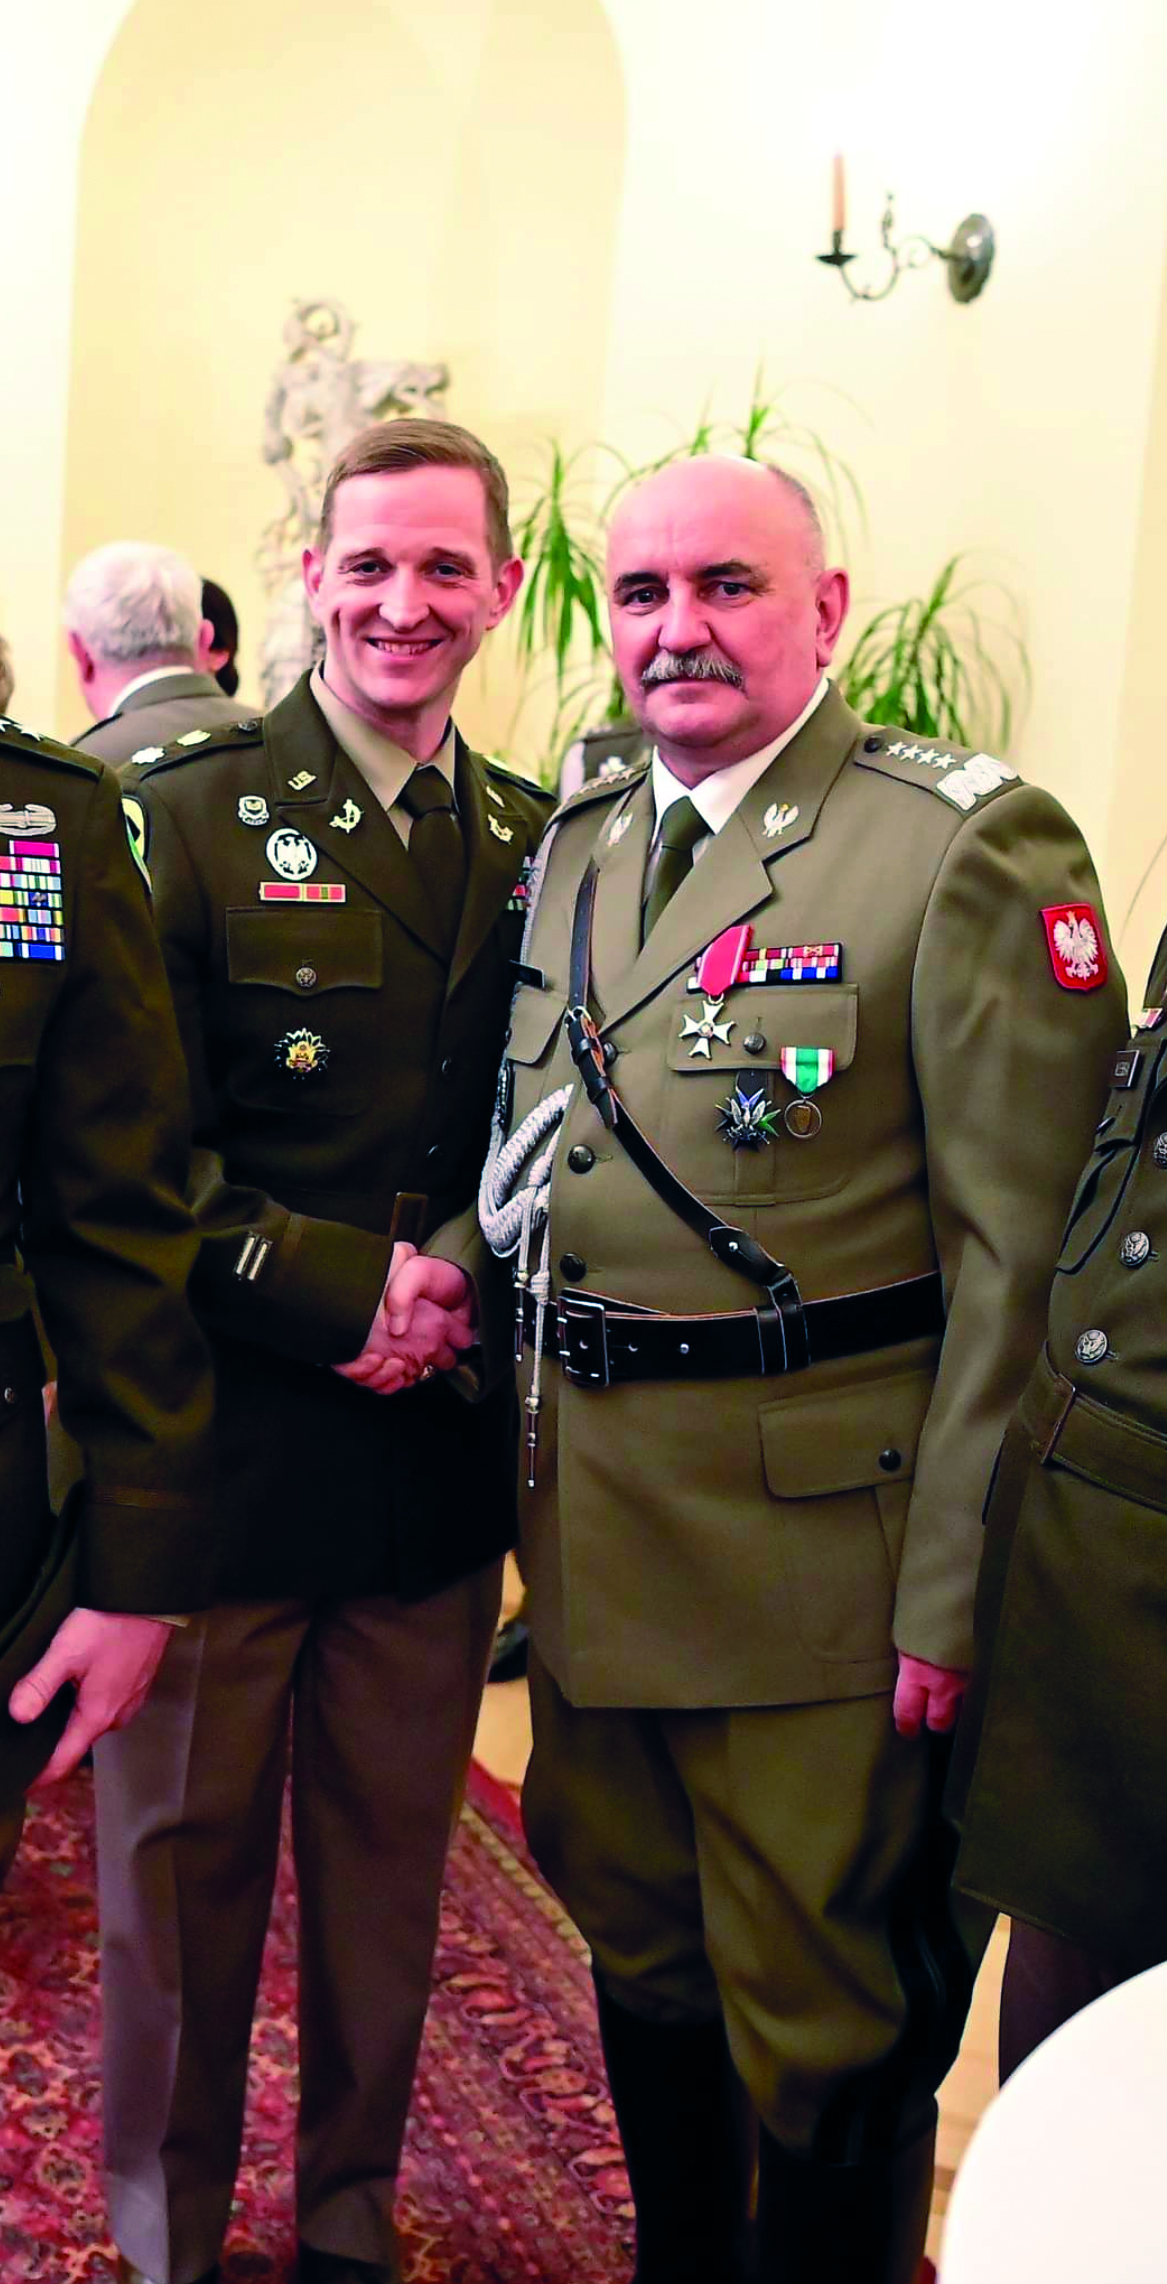 LTC Robert N. Michaels and GEN (Ret.) Jaroslaw
        Mika at GEN Mika’s retirement reception in
        Warsaw. GEN Mika was a staunch supporter of
        interoperability initiatives with the U.S. military
        and was critical to establishing LTC Michaels’
        position in his headquarters. GEN Mika also
        directed the full integration of the U.S. Army MPEP
        into discussions within the Polish government
        regarding Poland’s military assistance mission to
        Ukraine and the applicability of international law.
        (Photo courtesy of authors)